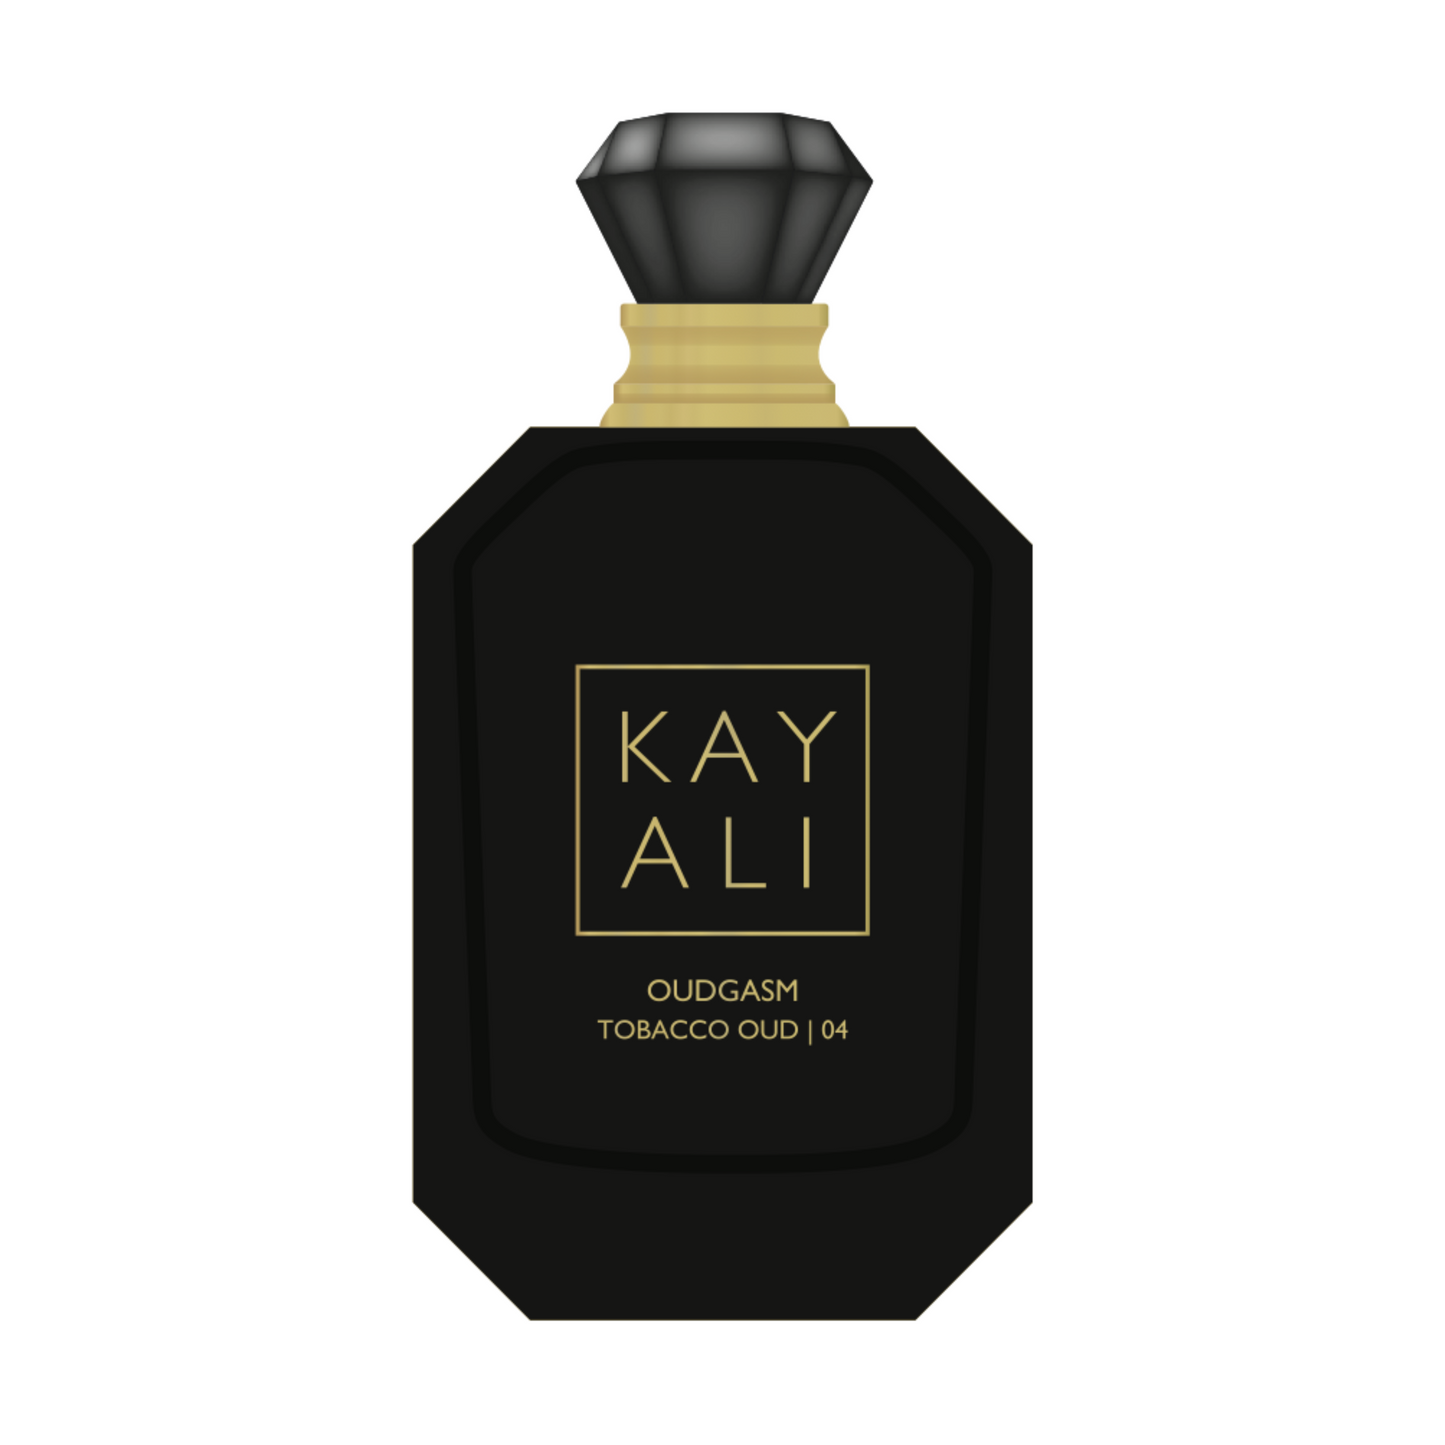 5ml Bottle - Oudgasm Tabacco Oud by Kayali (From ScentClub Kit #7)